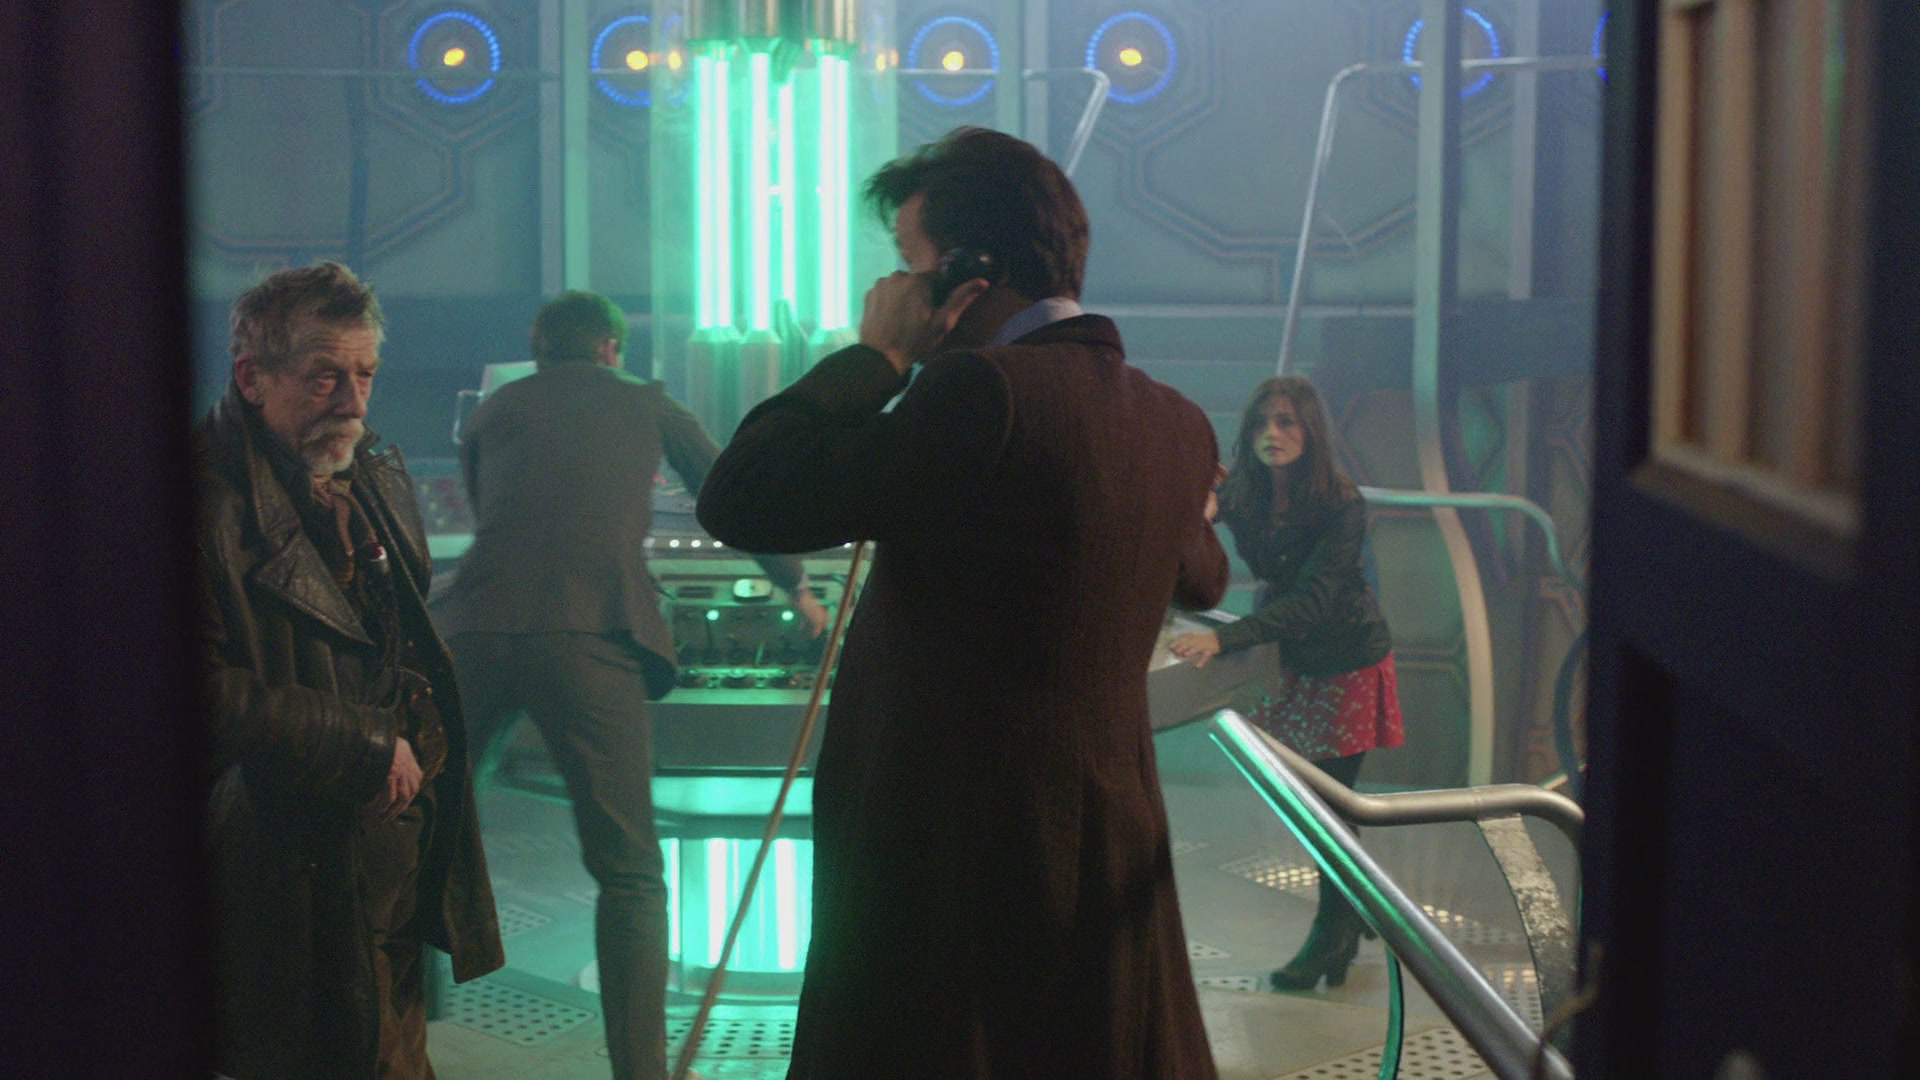 DayOfTheDoctor-Caps-0944.jpg